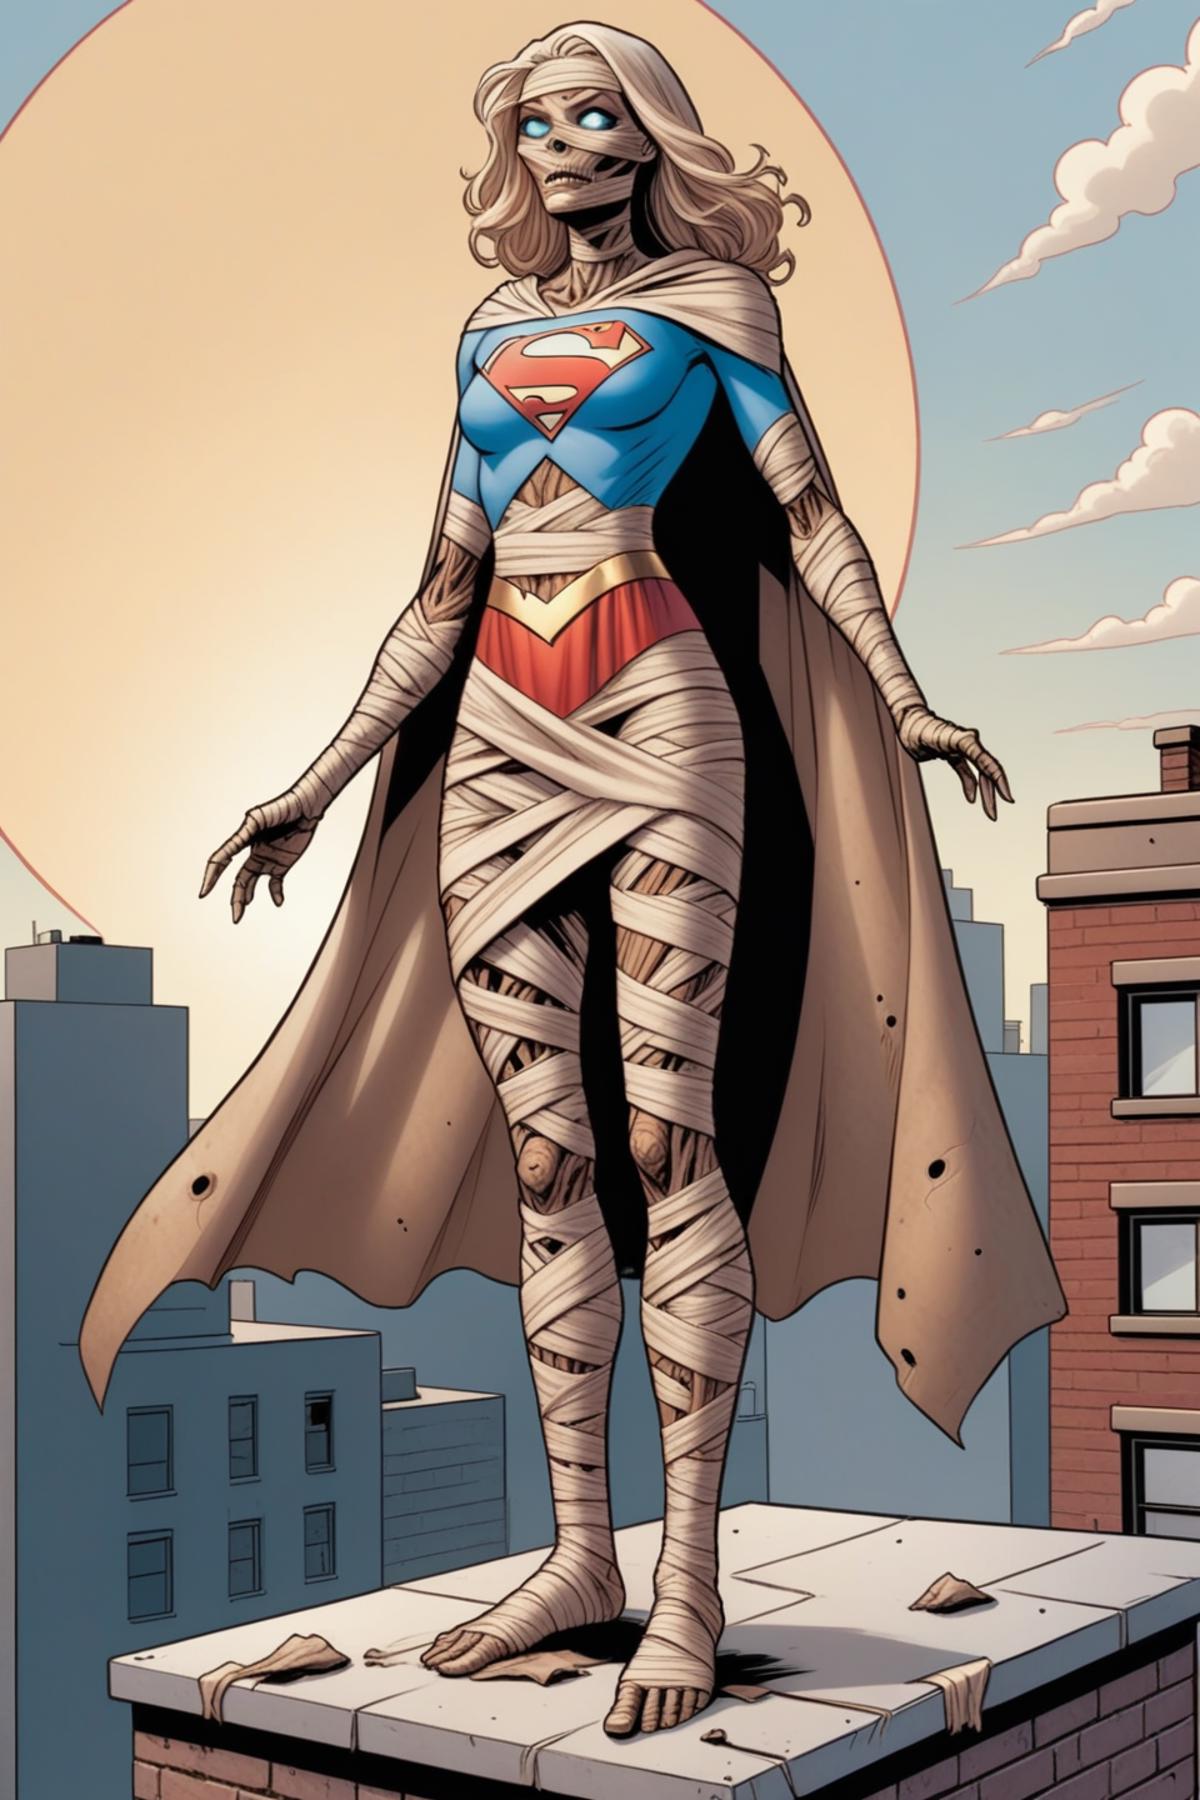 A Super Woman comic book illustration with a blue and red costume.